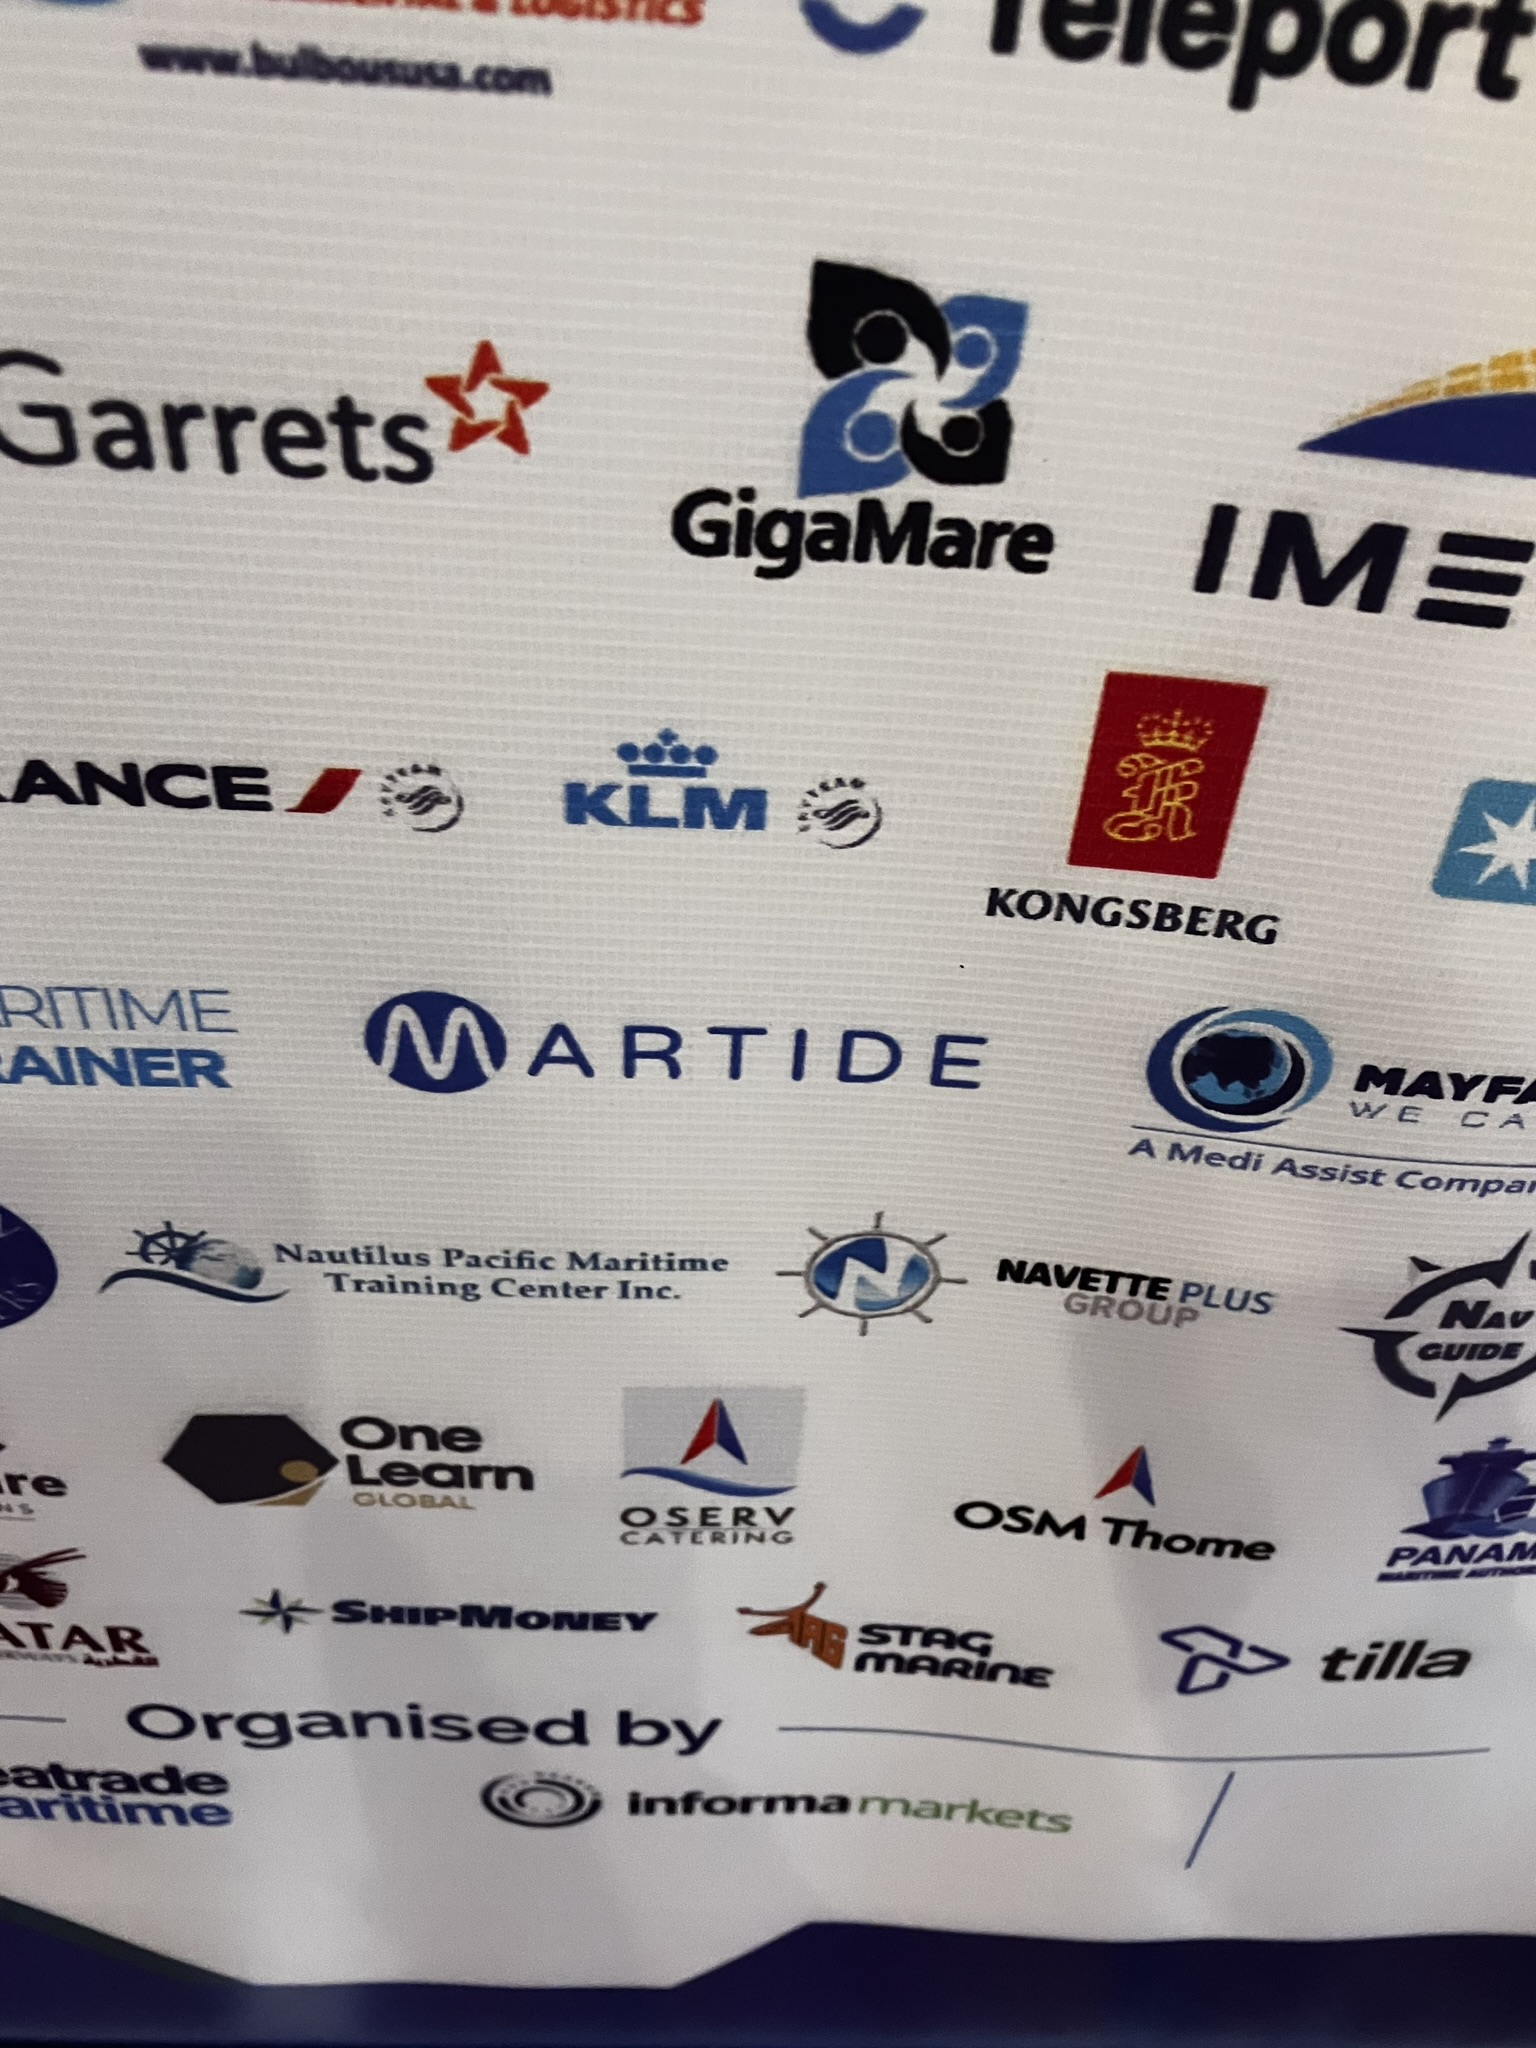 Banner showing a close up of Martide's name among the list of exhibitors